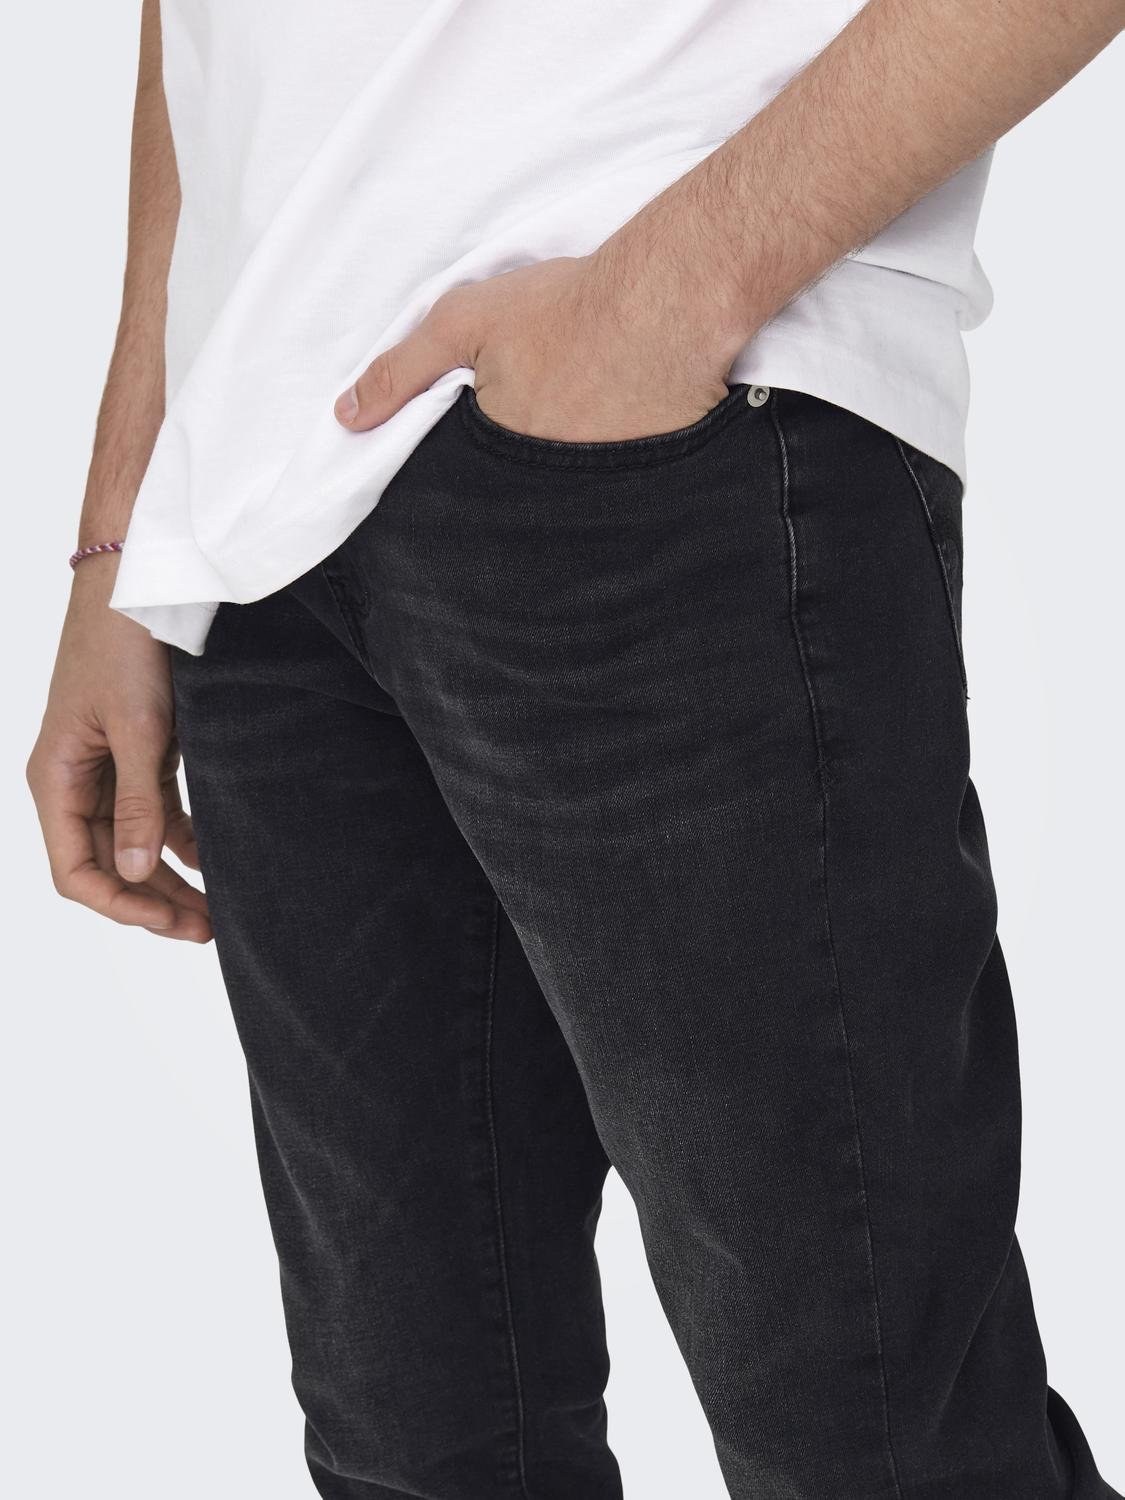 ONLY & SONS Tapered Fit Mid waist Jeans -Black Denim - 22027844